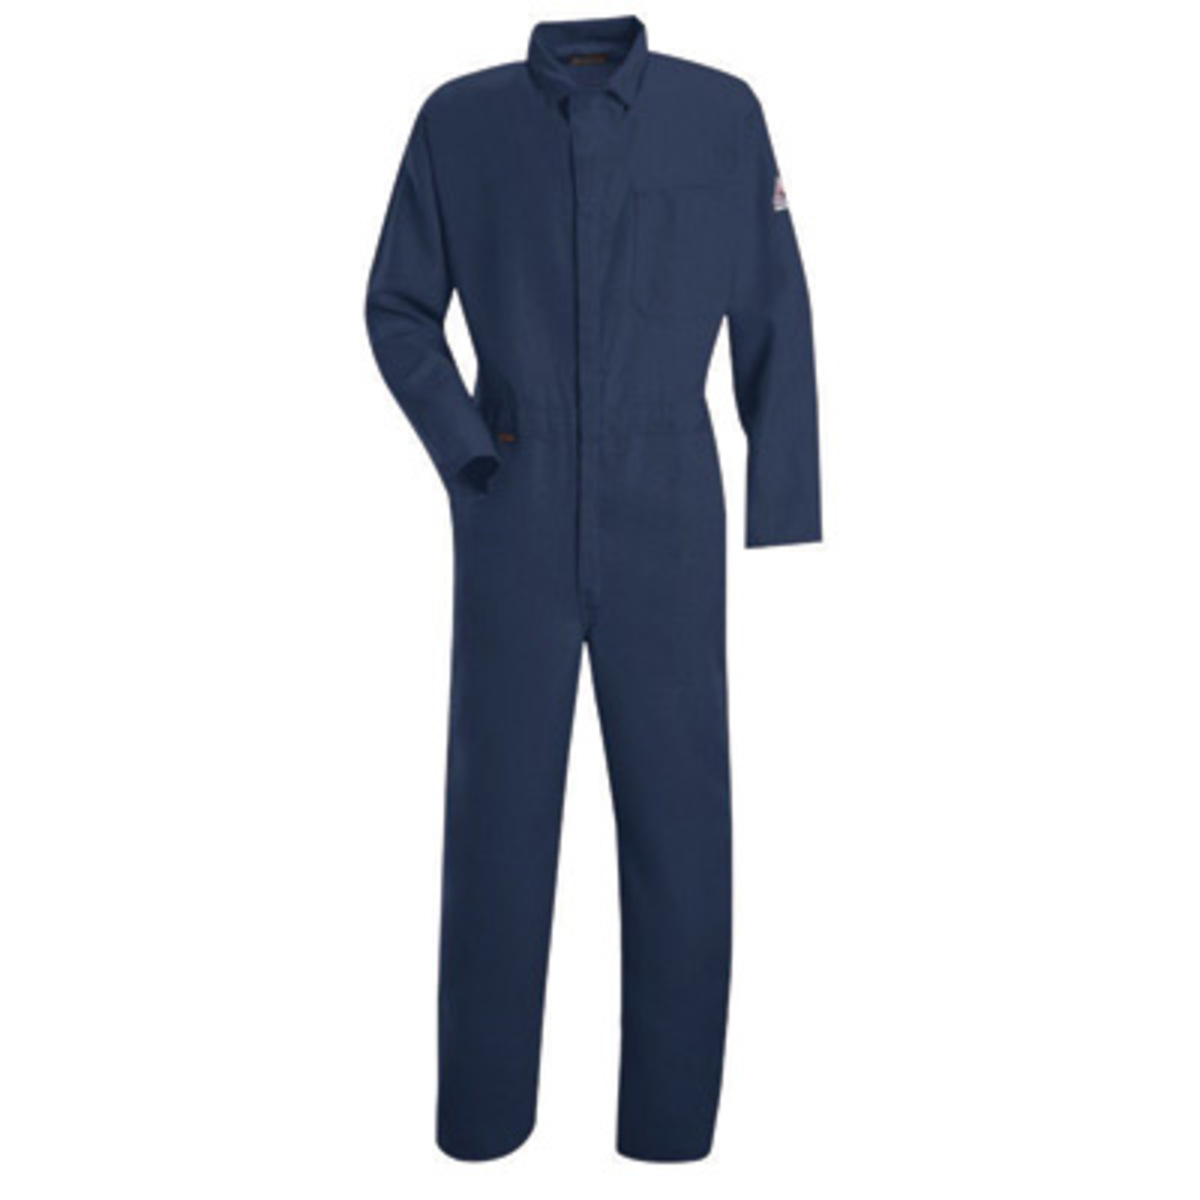 Stanco Safety Products™ 4X Navy Blue Nomex® IIIA Arc Rated Flame Resistant Coveralls With Concealed 2-Way Front Zipper Closure A